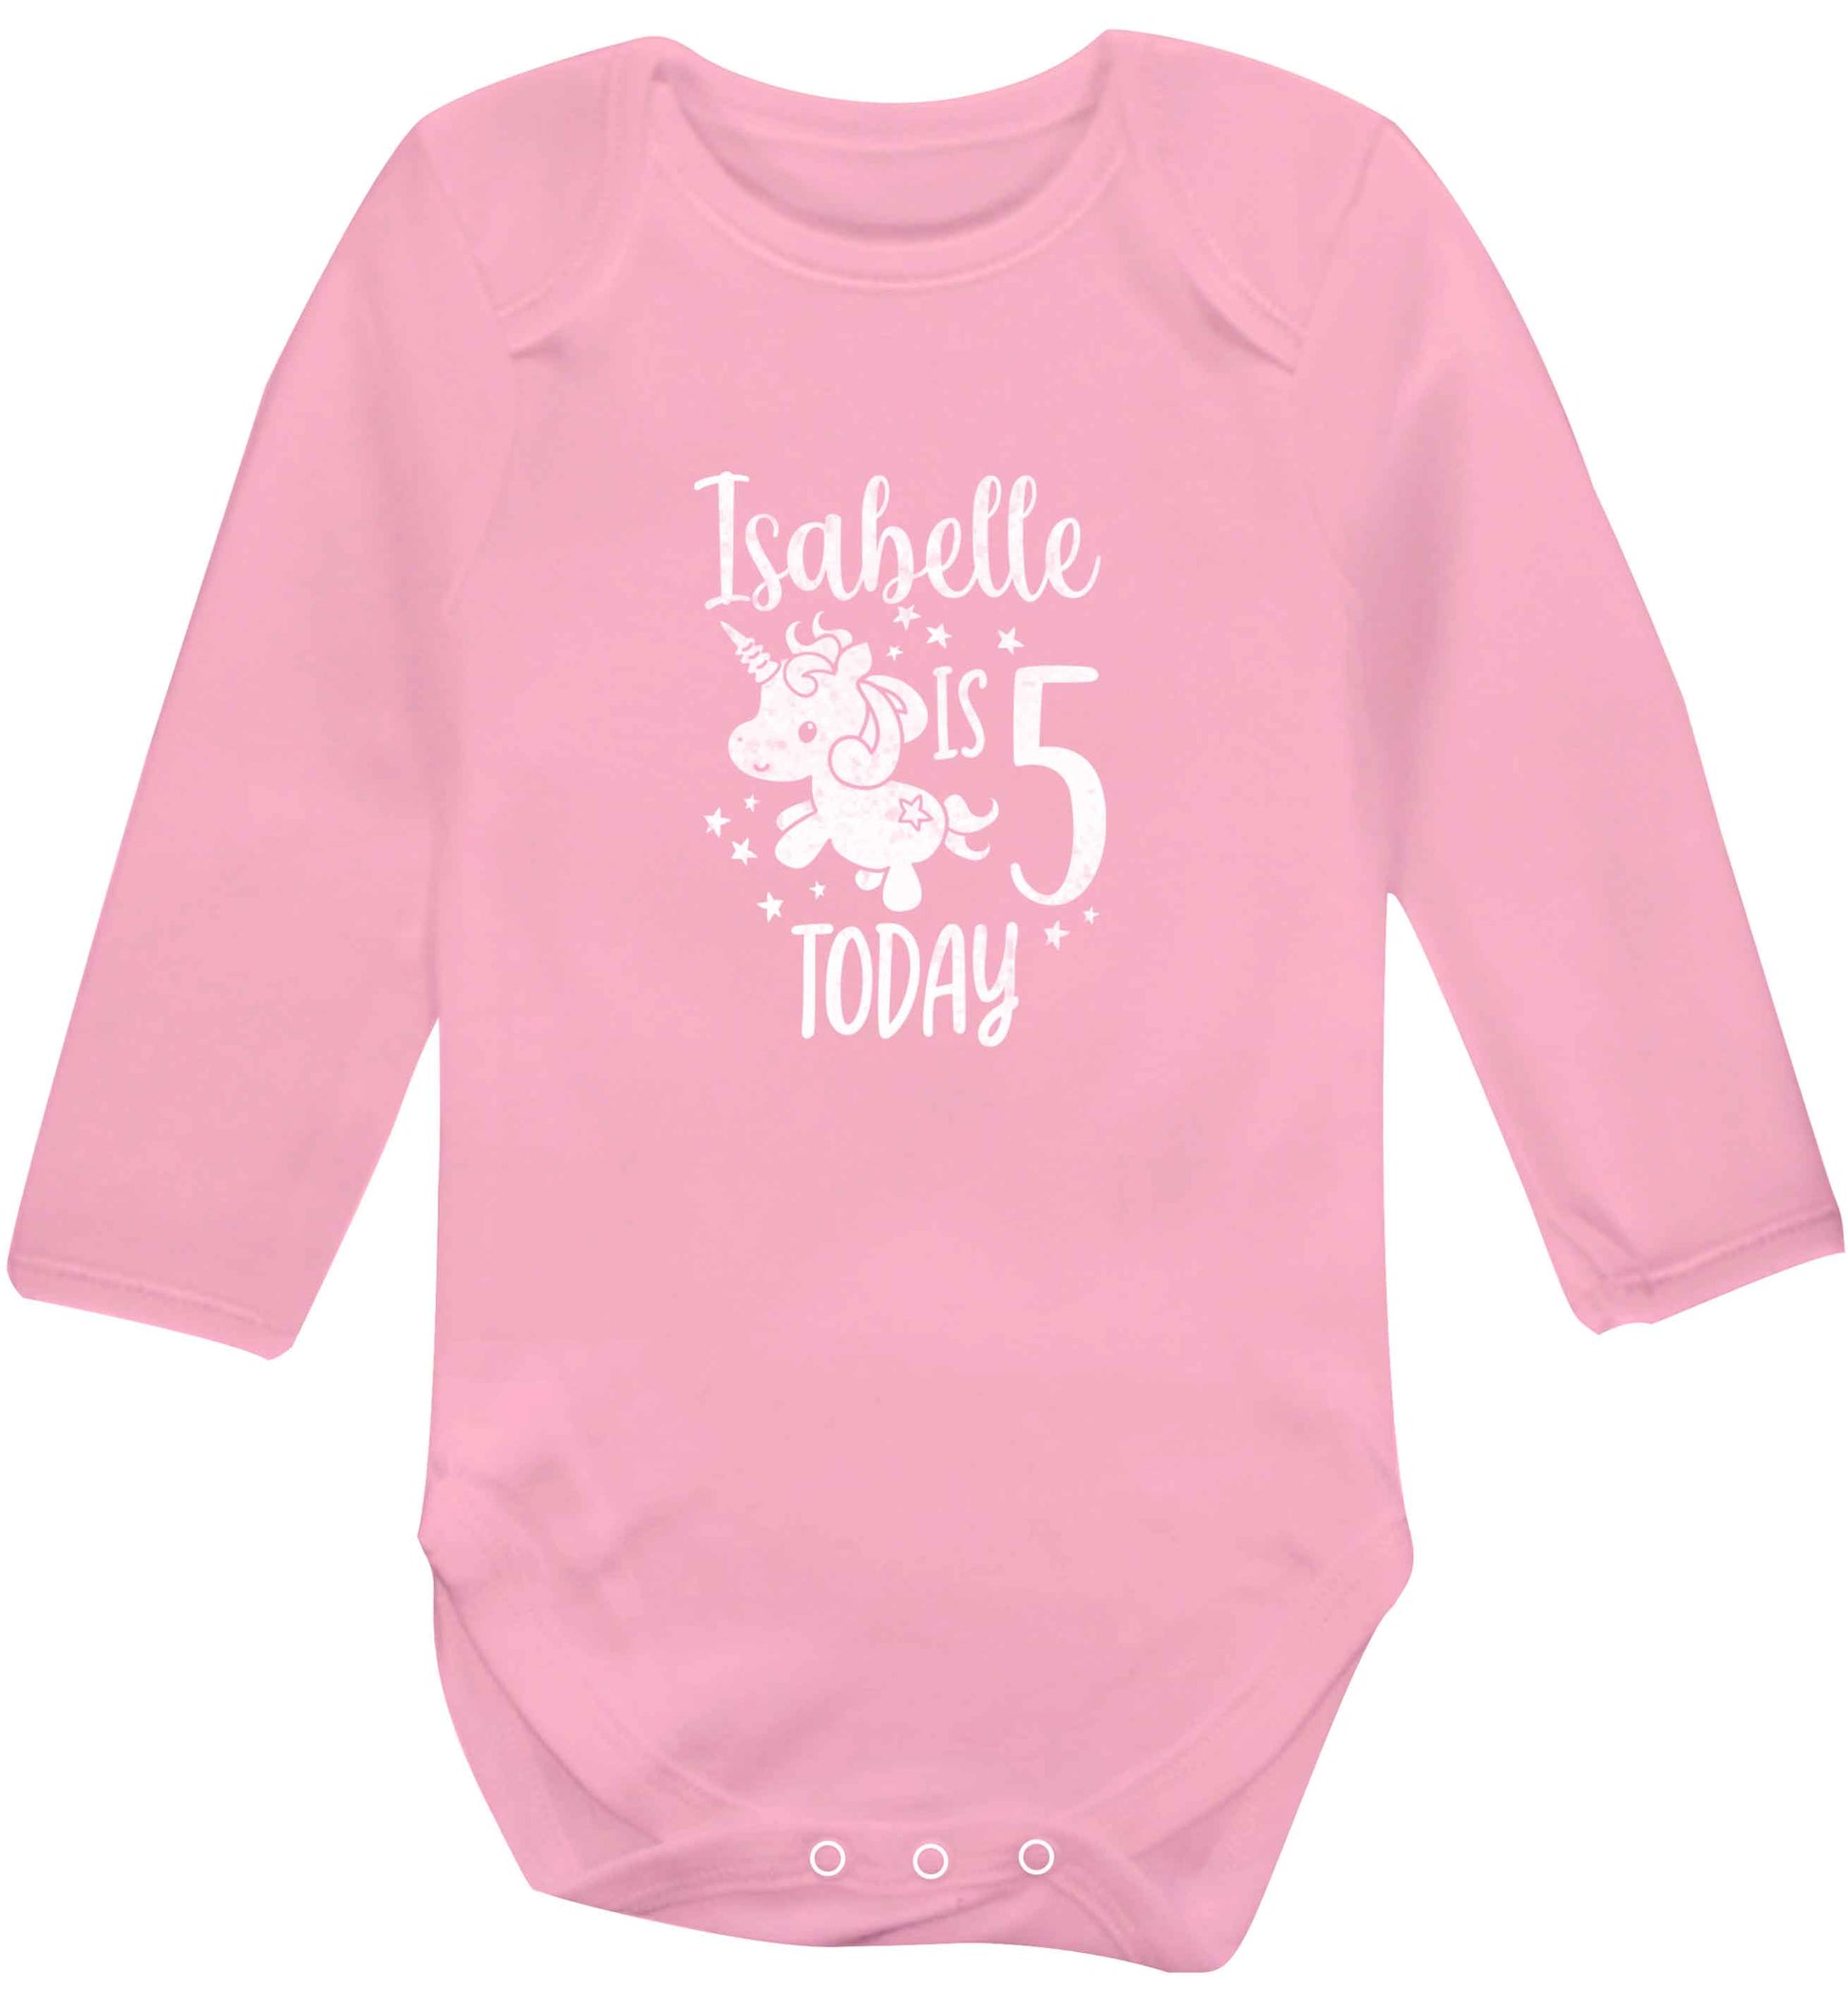 Today I am - Personalise with any name or age! Birthday unicorn baby vest long sleeved pale pink 6-12 months